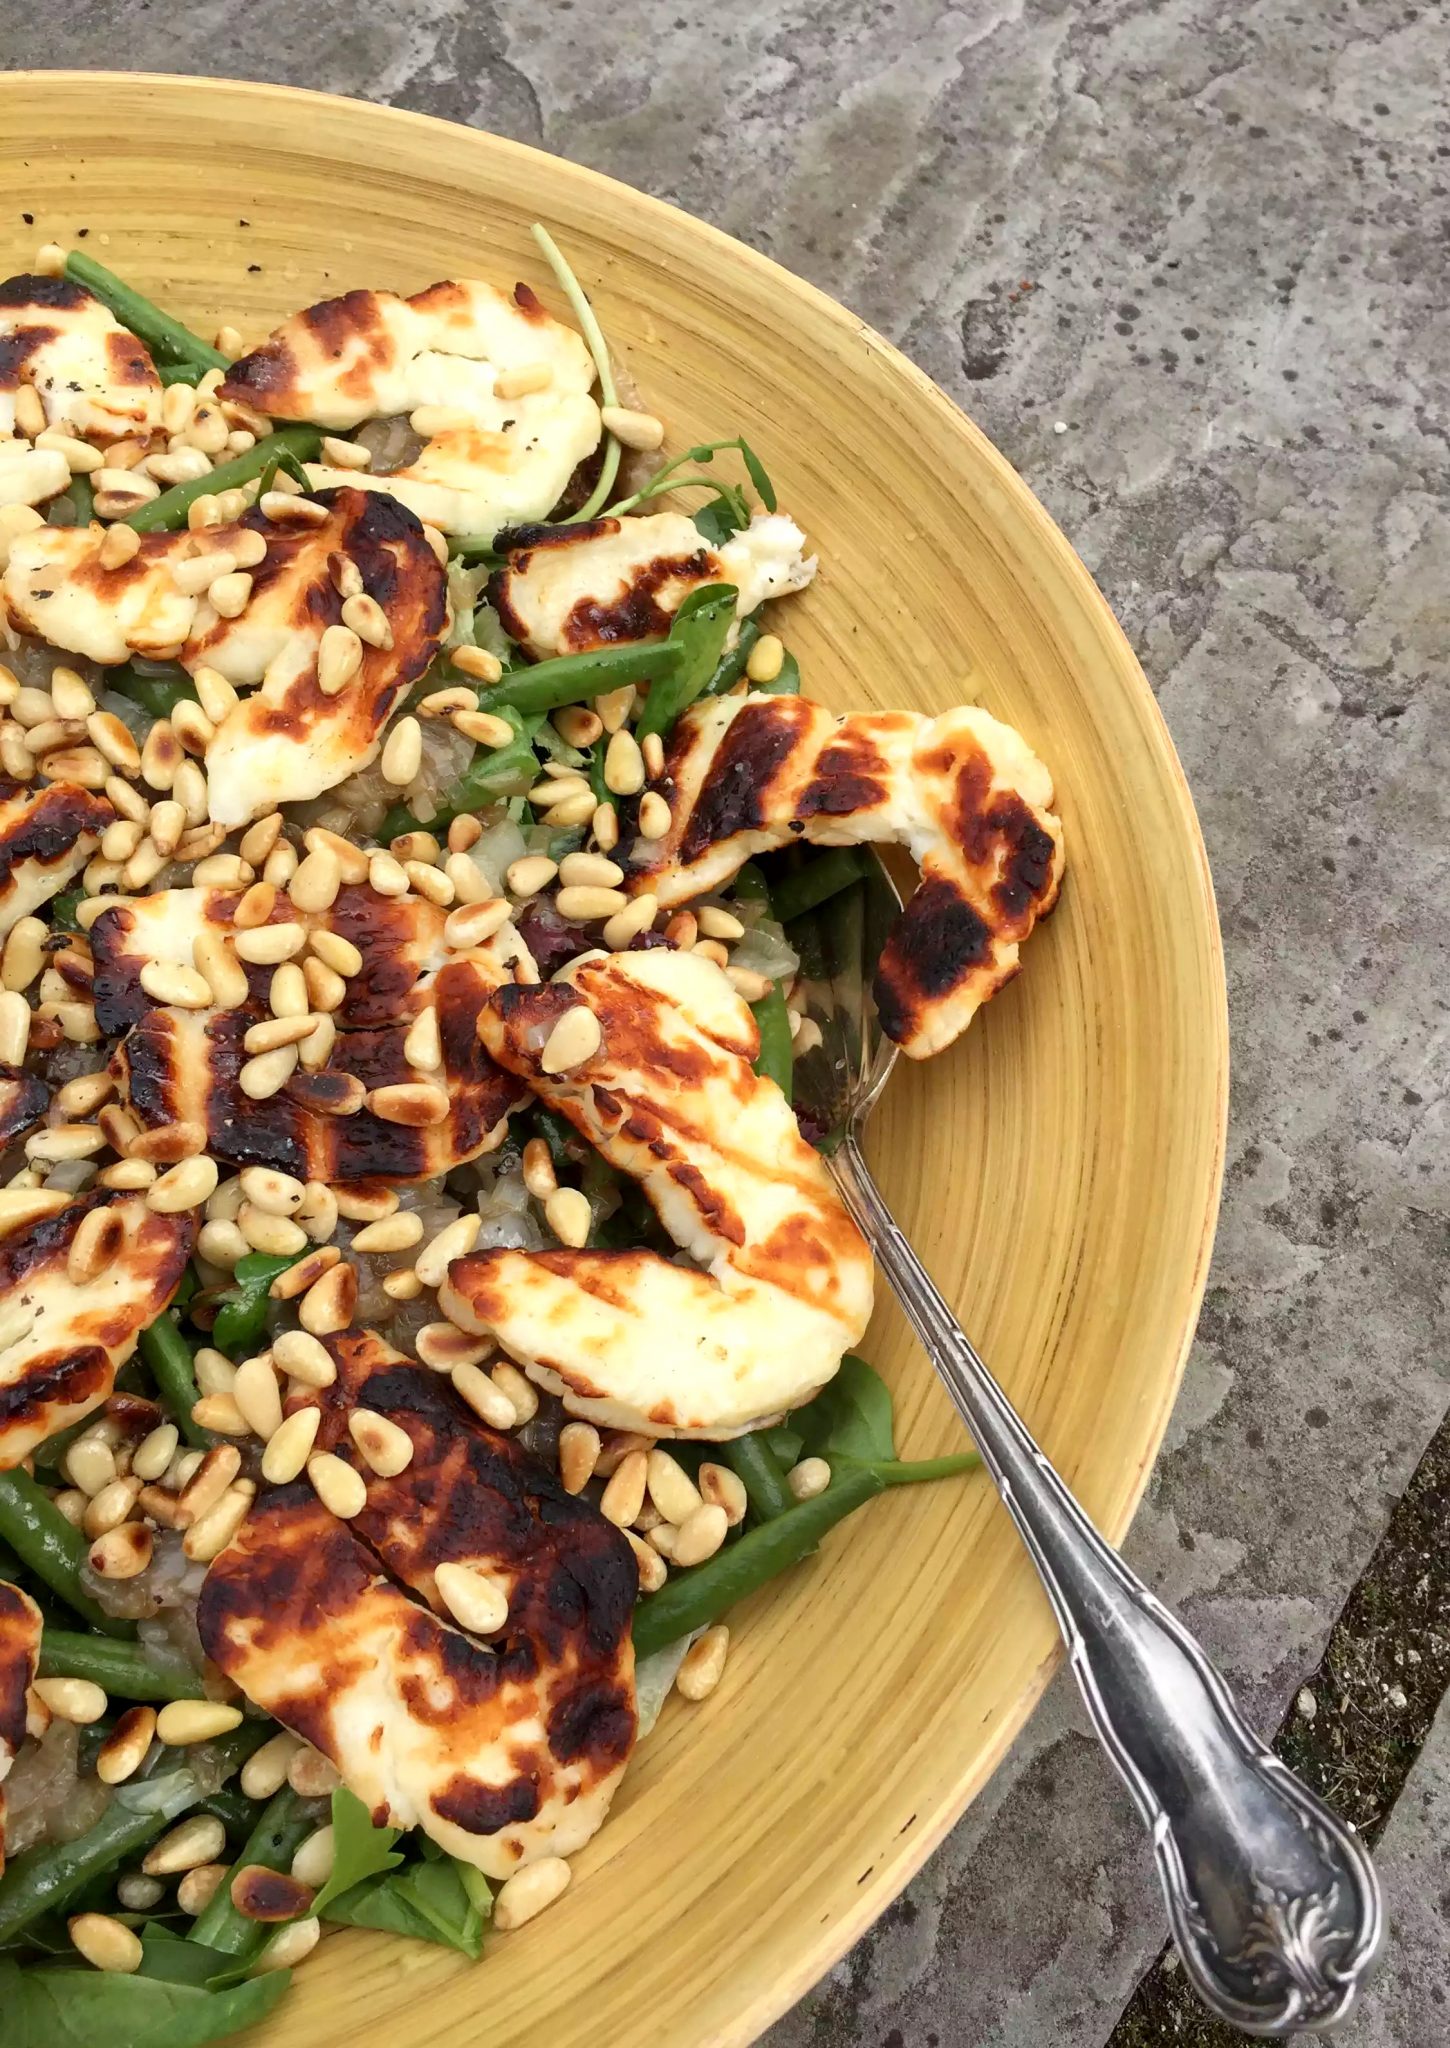 Grilled Halloumi, Caramelised Shallots, Green Bean & Pine Nut Salad with a Lime Dressing